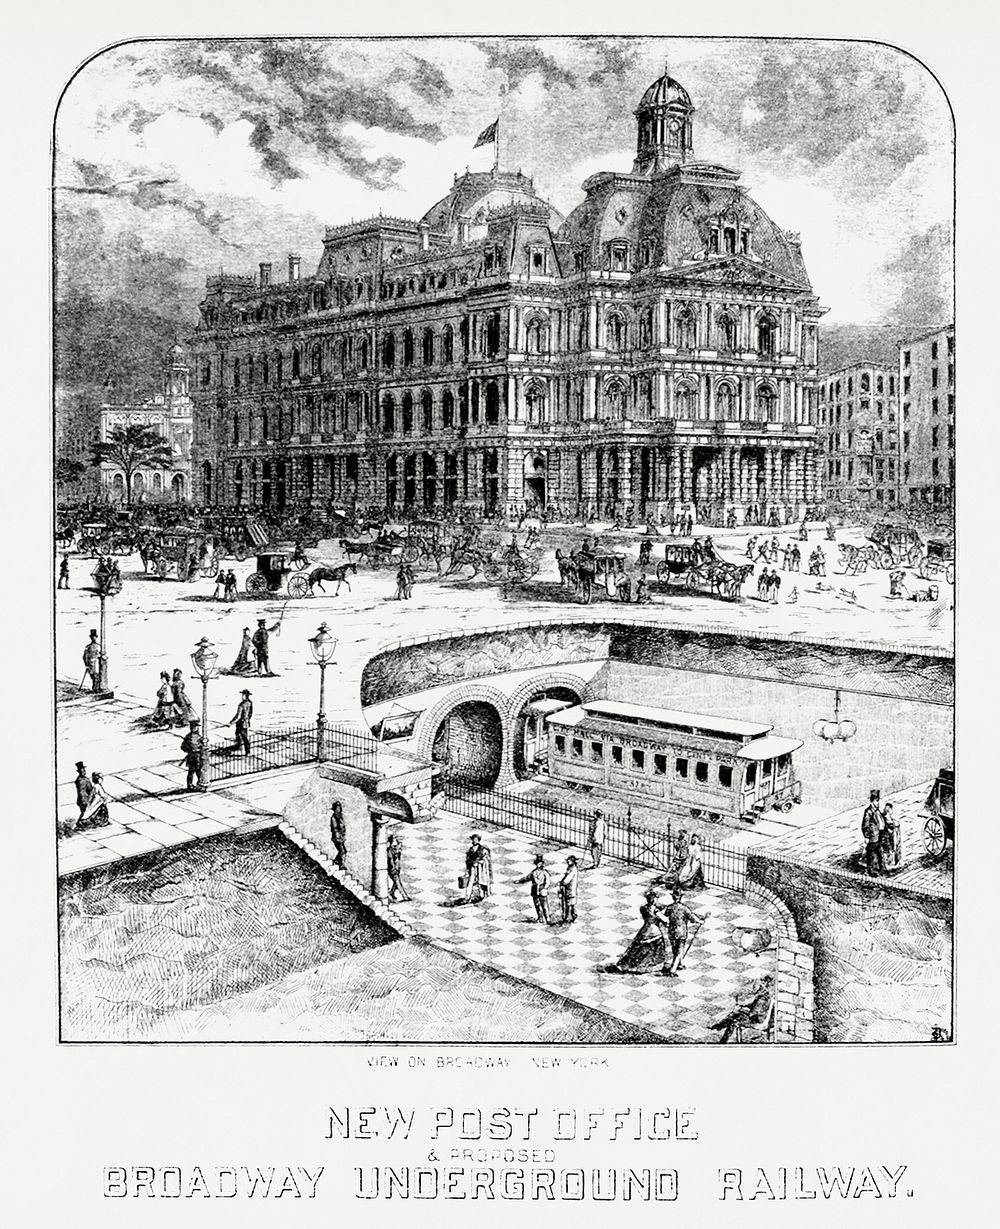 Illustration of New post office & proposed Broadway underground railway from Illustrated description of the Broadway…